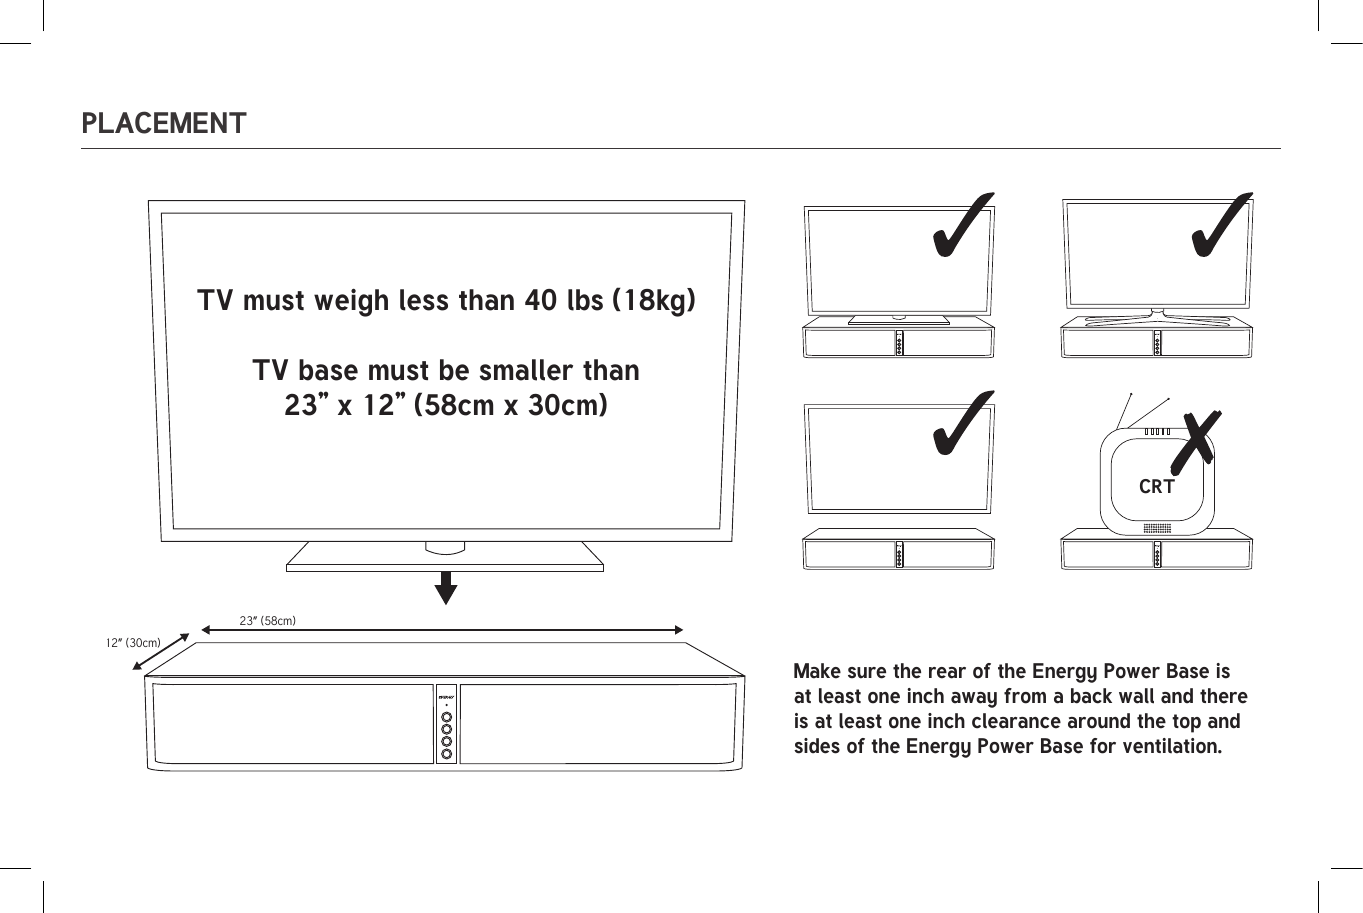 23” (58cm)12” (30cm)CRT23” (58cm)12” (30cm)CRTPLACEMENTTV must weigh less than 40 lbs (18kg)TV base must be smaller than23” x 12” (58cm x 30cm)Make sure the rear of the Energy Power Base is at least one inch away from a back wall and there is at least one inch clearance around the top and sides of the Energy Power Base for ventilation.